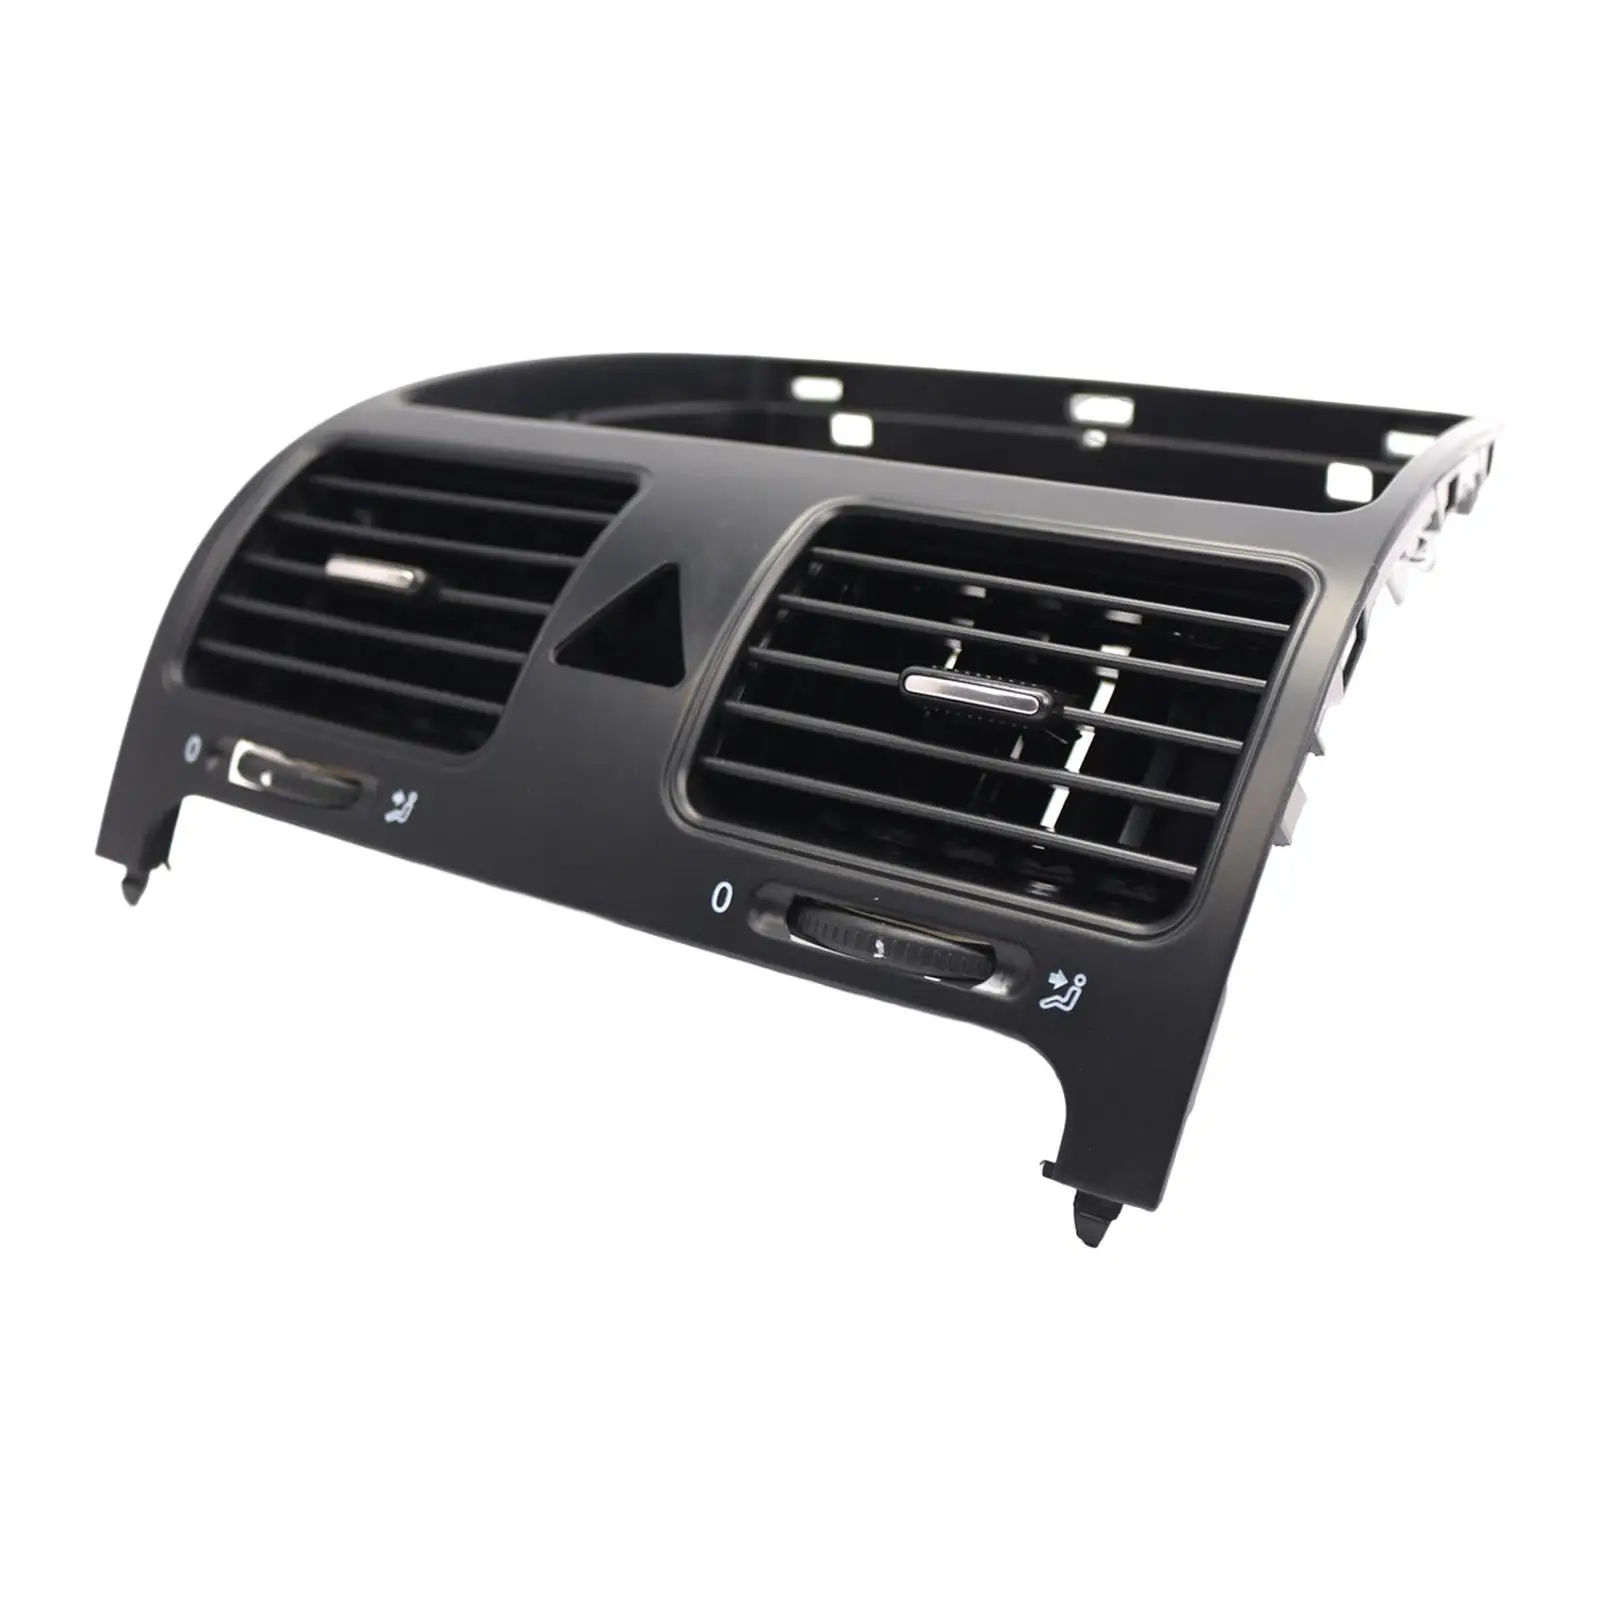 A/C Air Vent Outlet Grille Panel Premium Material Easily Install Center Dashboard for forVW Golf MK5 Assembly Accessory